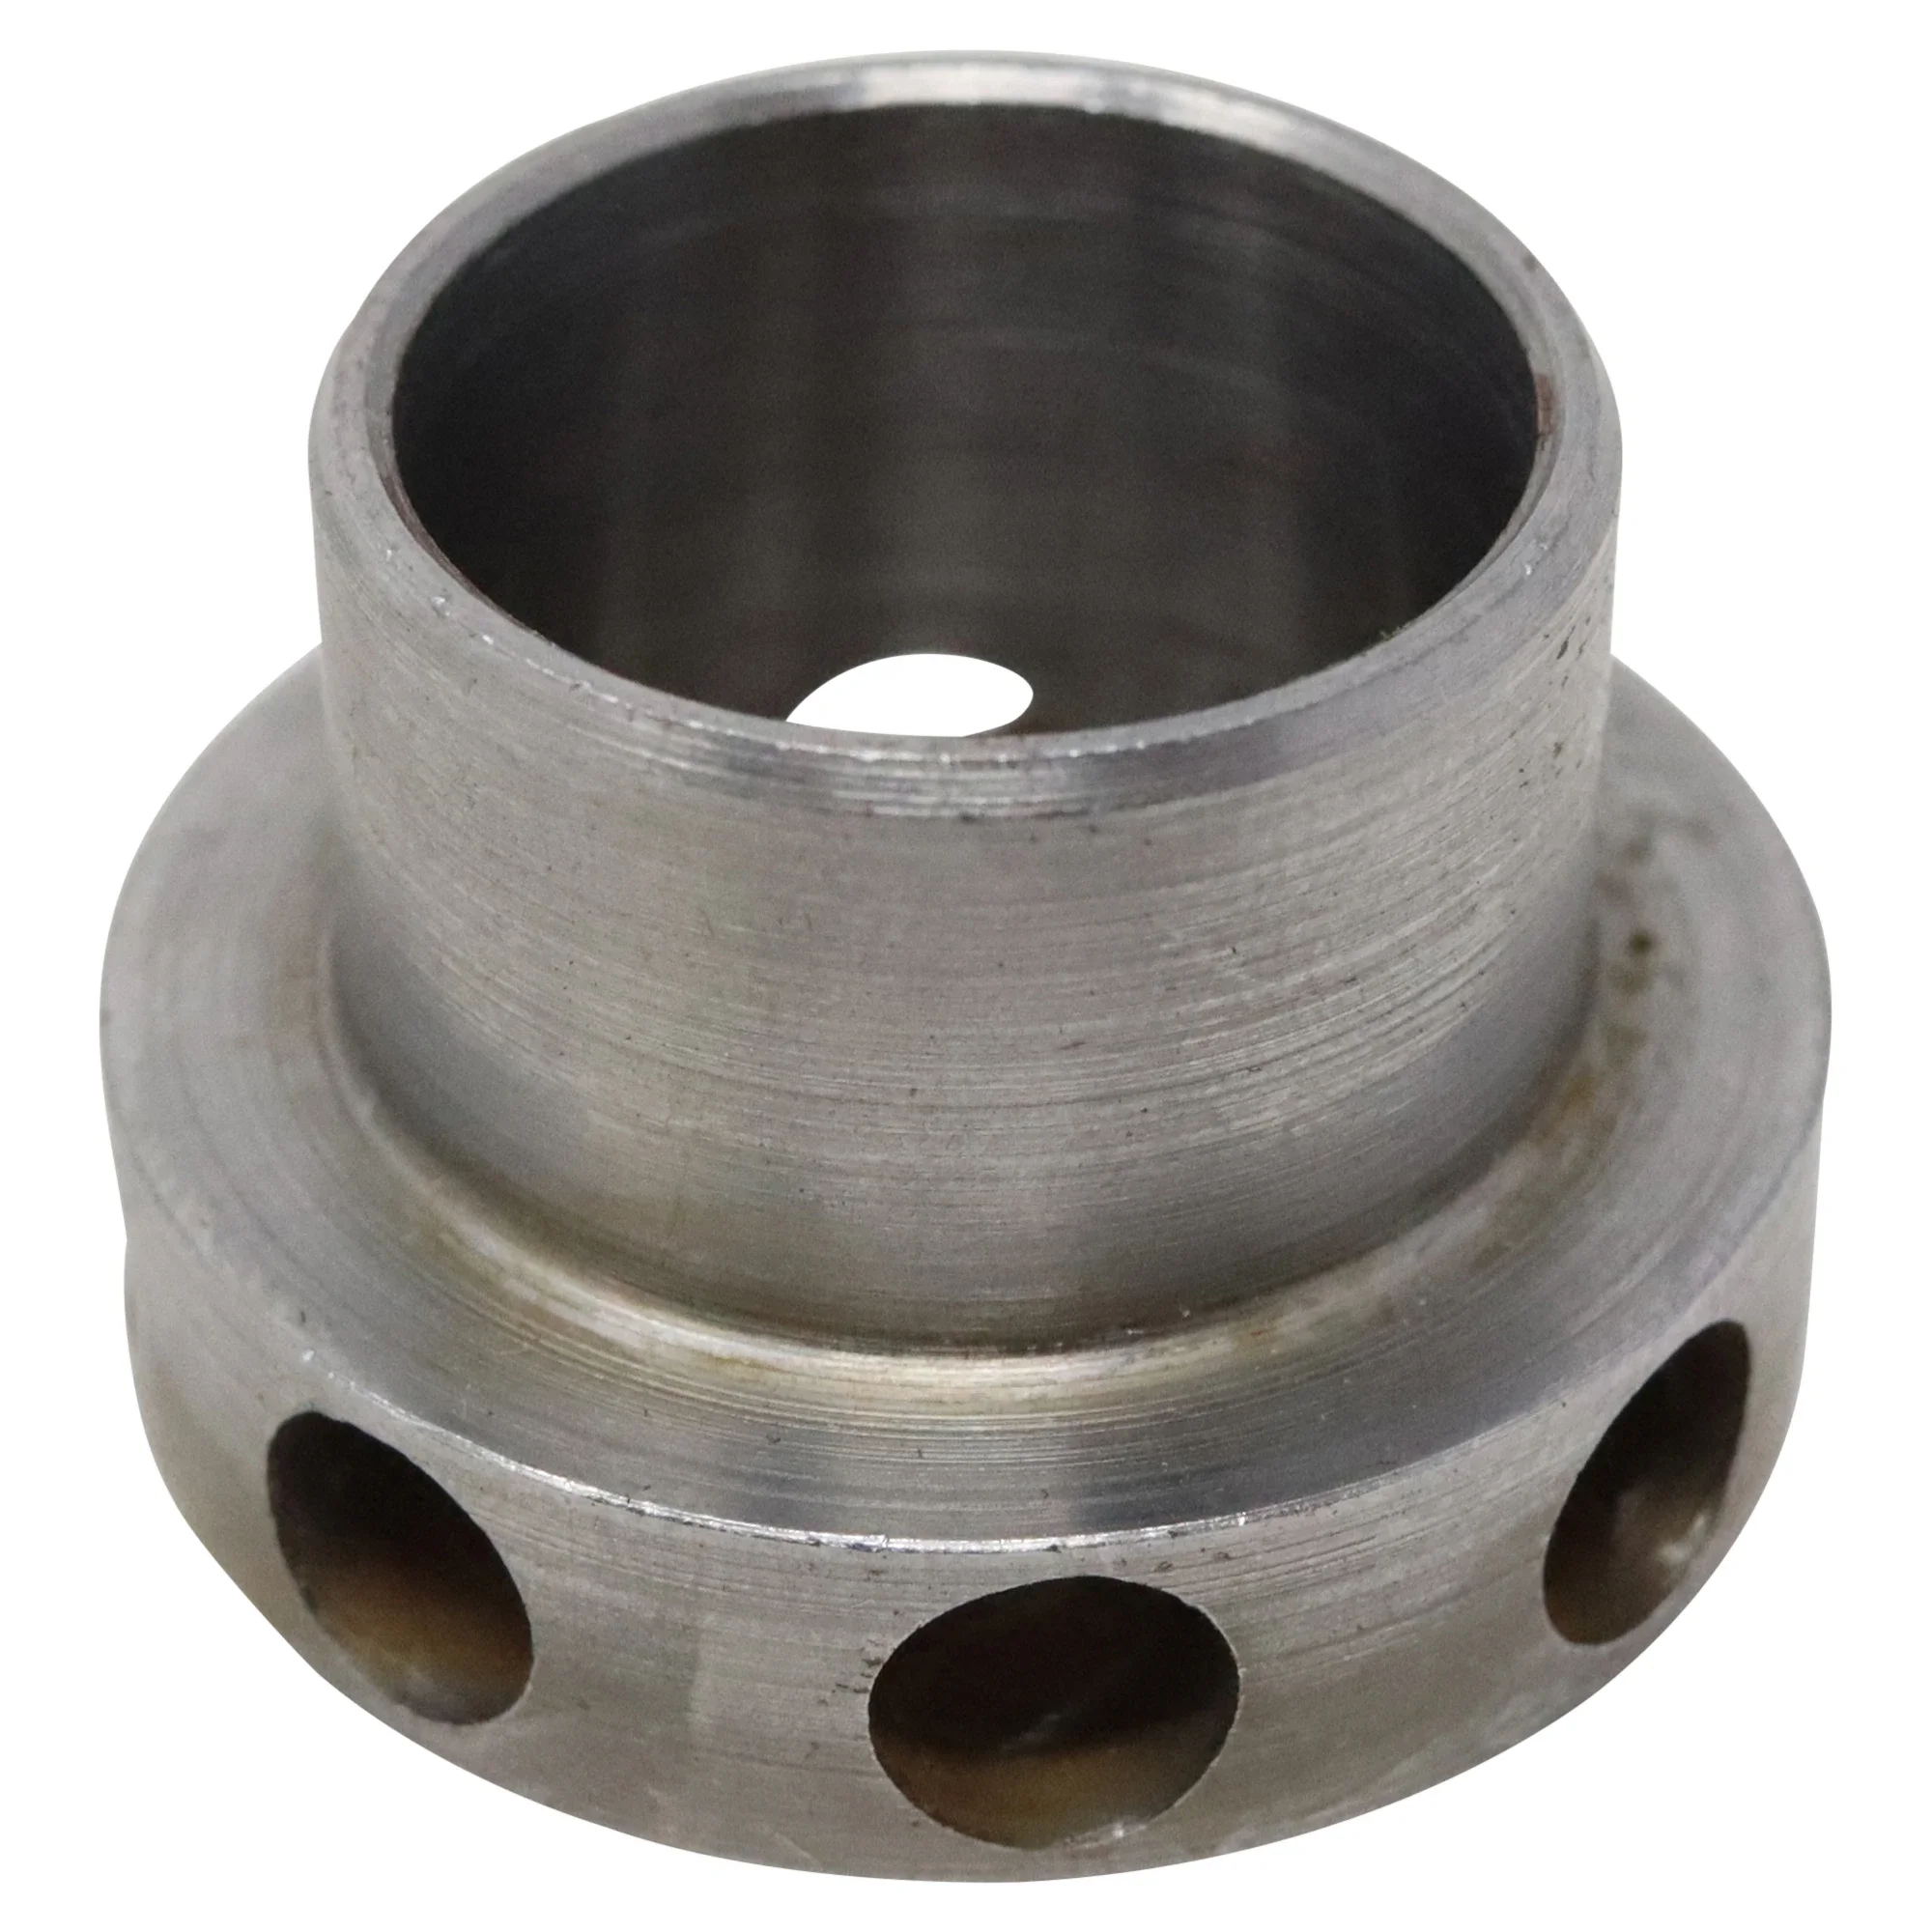 Wastebuilt® Replacement for Heil Restrictor Check Valve